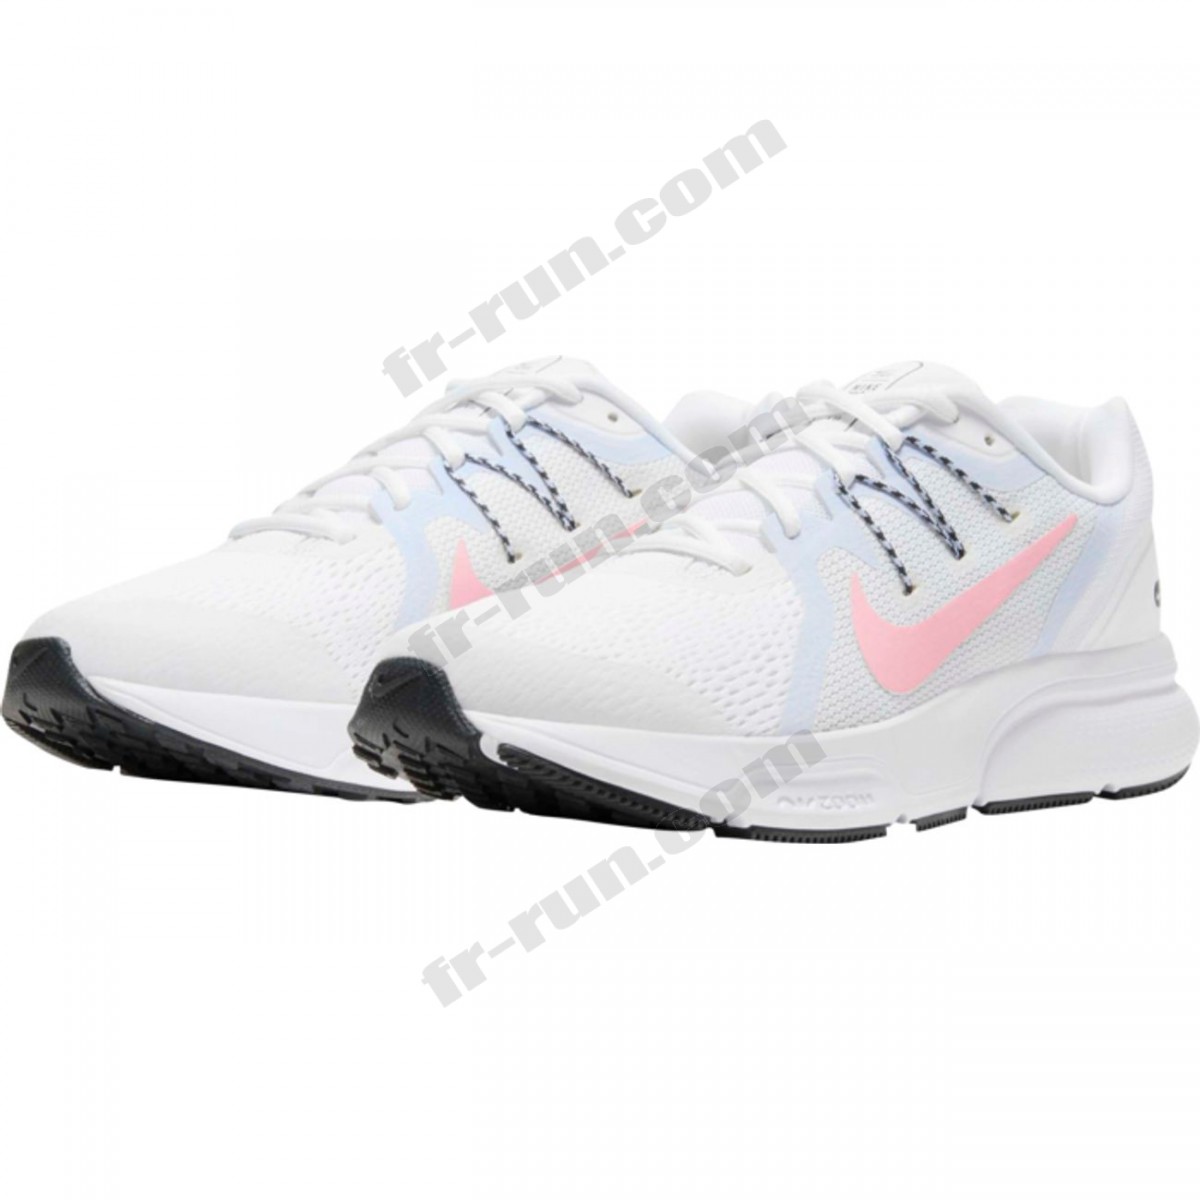 Nike/CHAUSSURES BASSES running femme NIKE WMNS NIKE ZOOM SPAN 3 ◇◇◇ Pas Cher Du Tout - -1